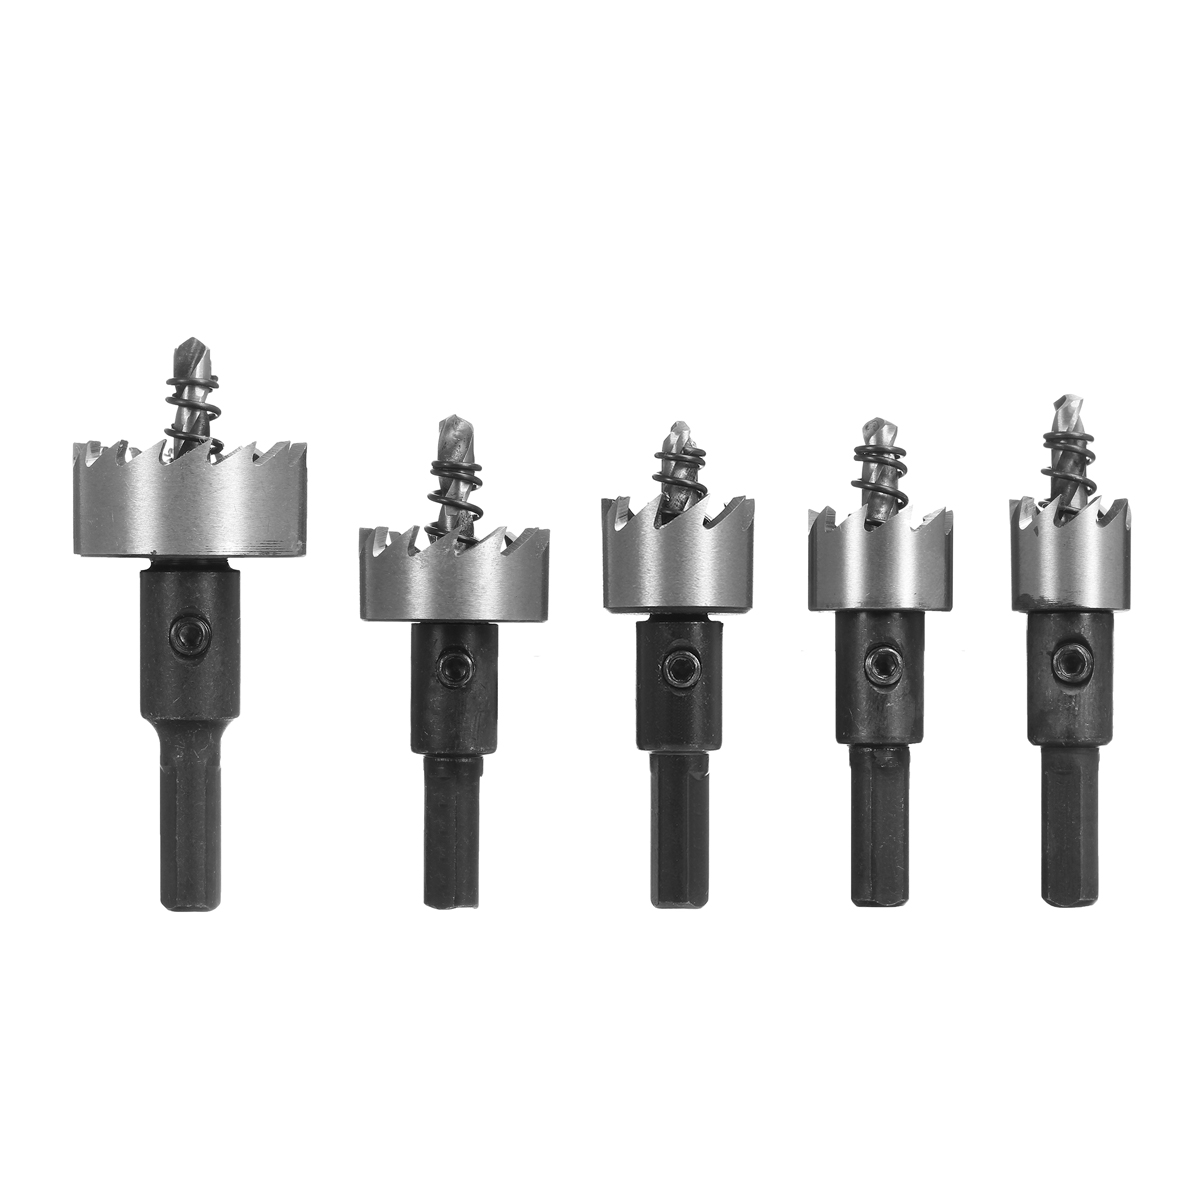 5Pcs-Saw-Tooth-HSS-Drill-Bit-Hole-Saw-Set-Stainless-Steel-Metal-Alloy-16-30mm-1203295-2